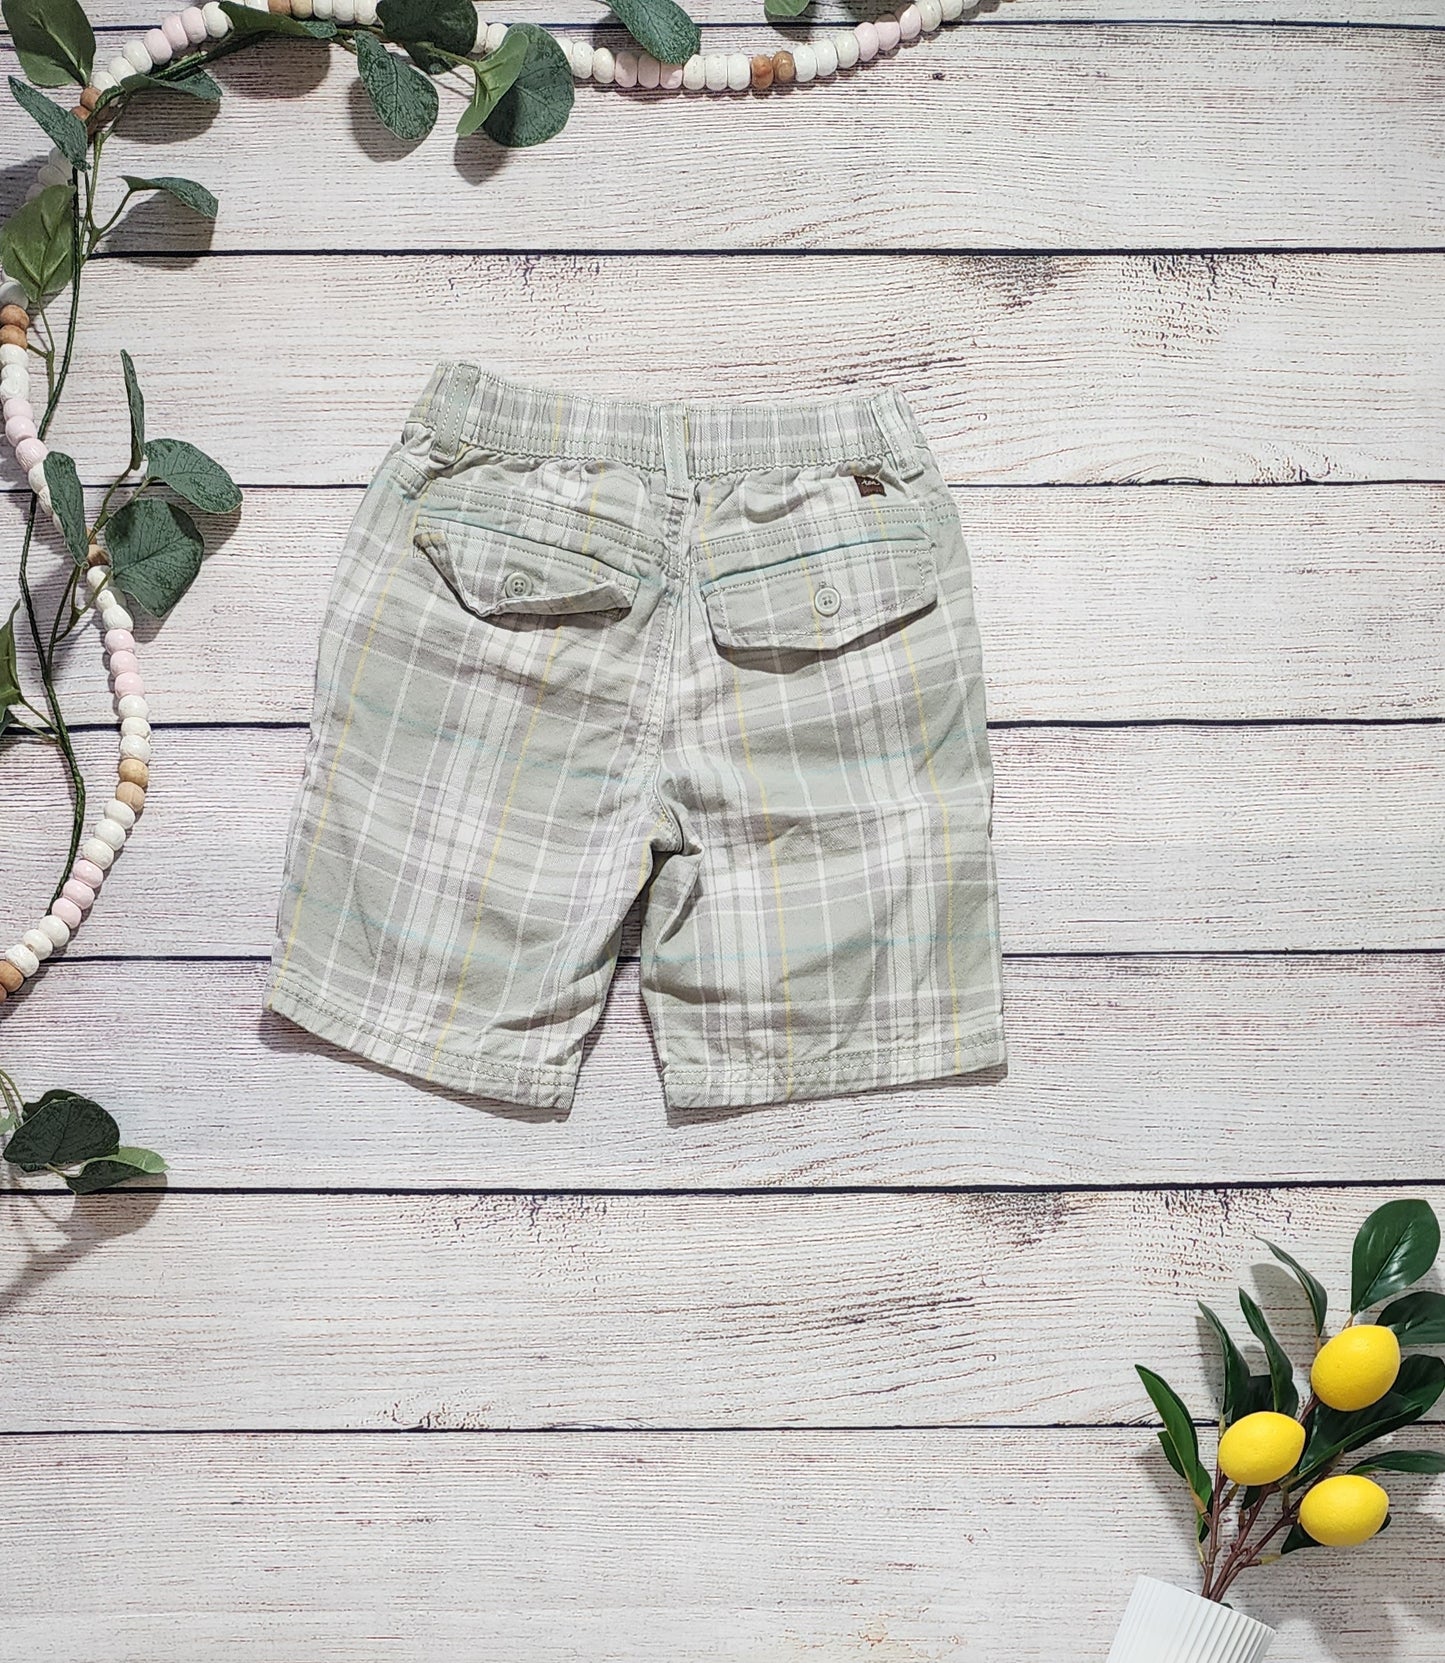 Tea Collection Shorts, Size 7